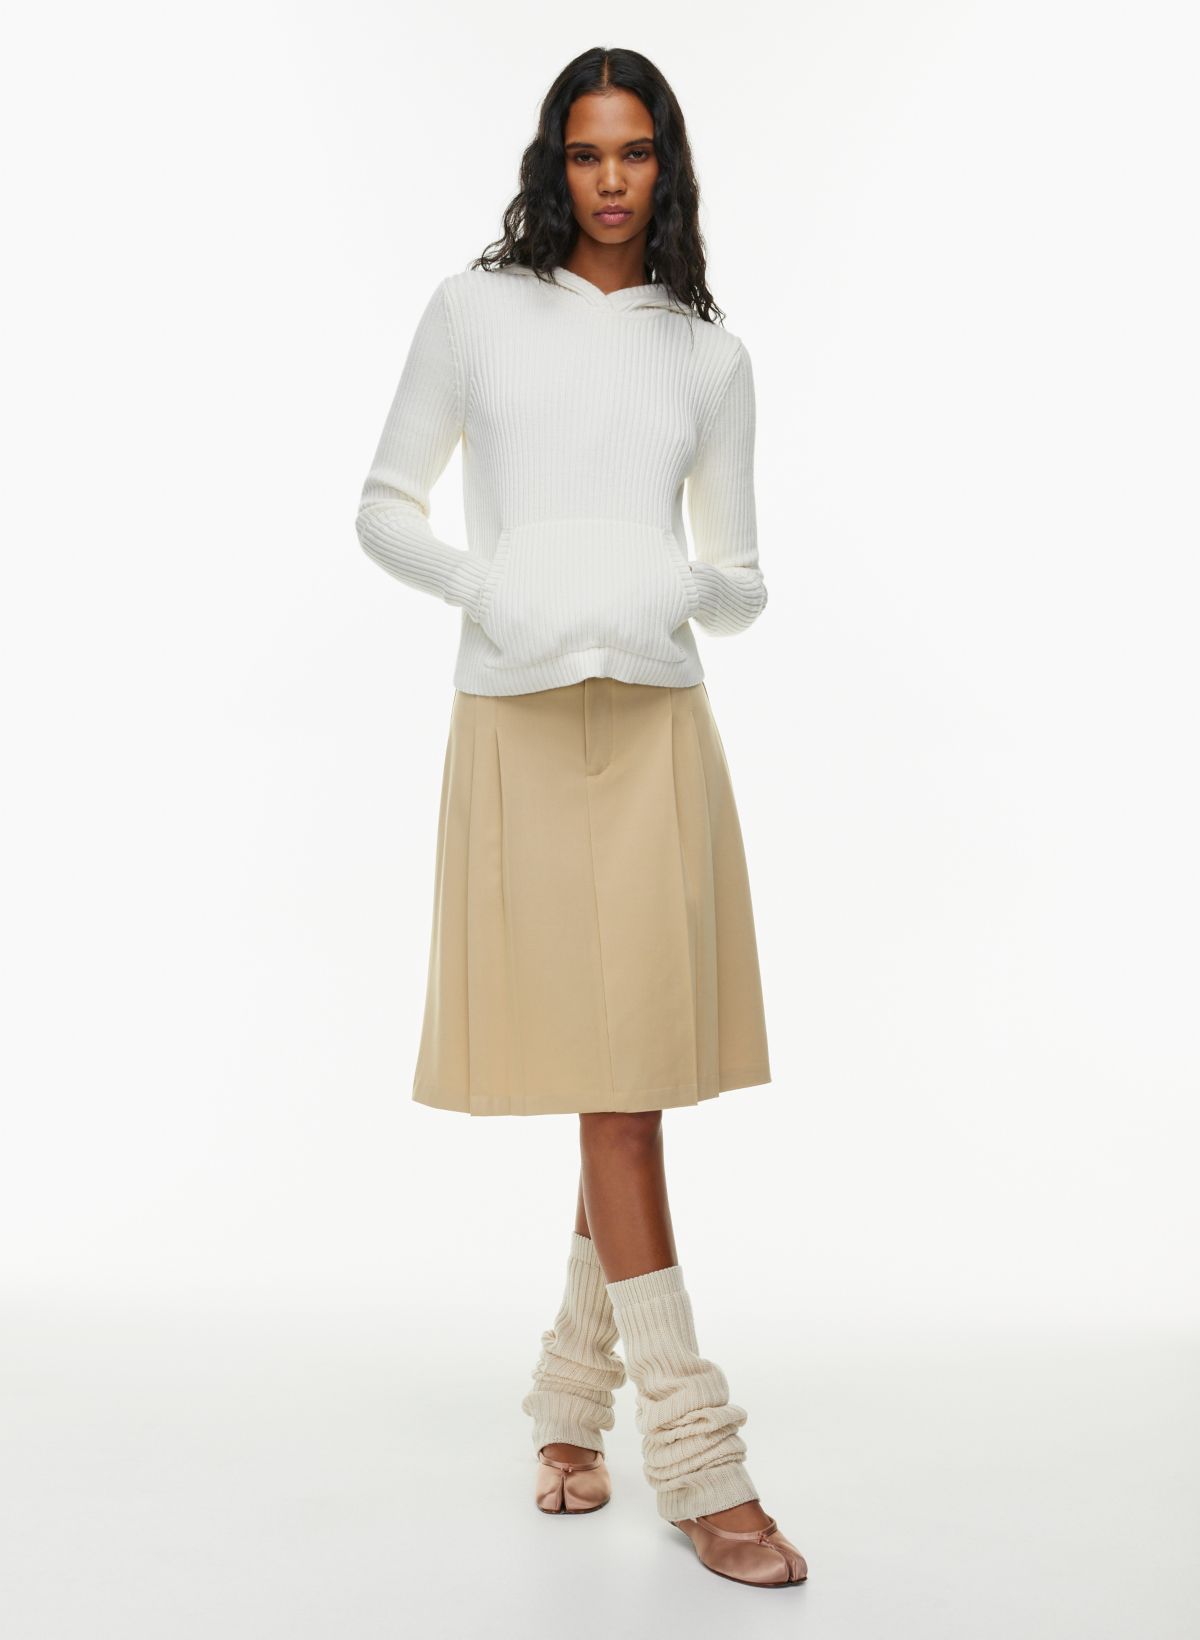 Versatile A-Line Belted Midi Skirt in Tan - Retro, Indie and Unique Fashion